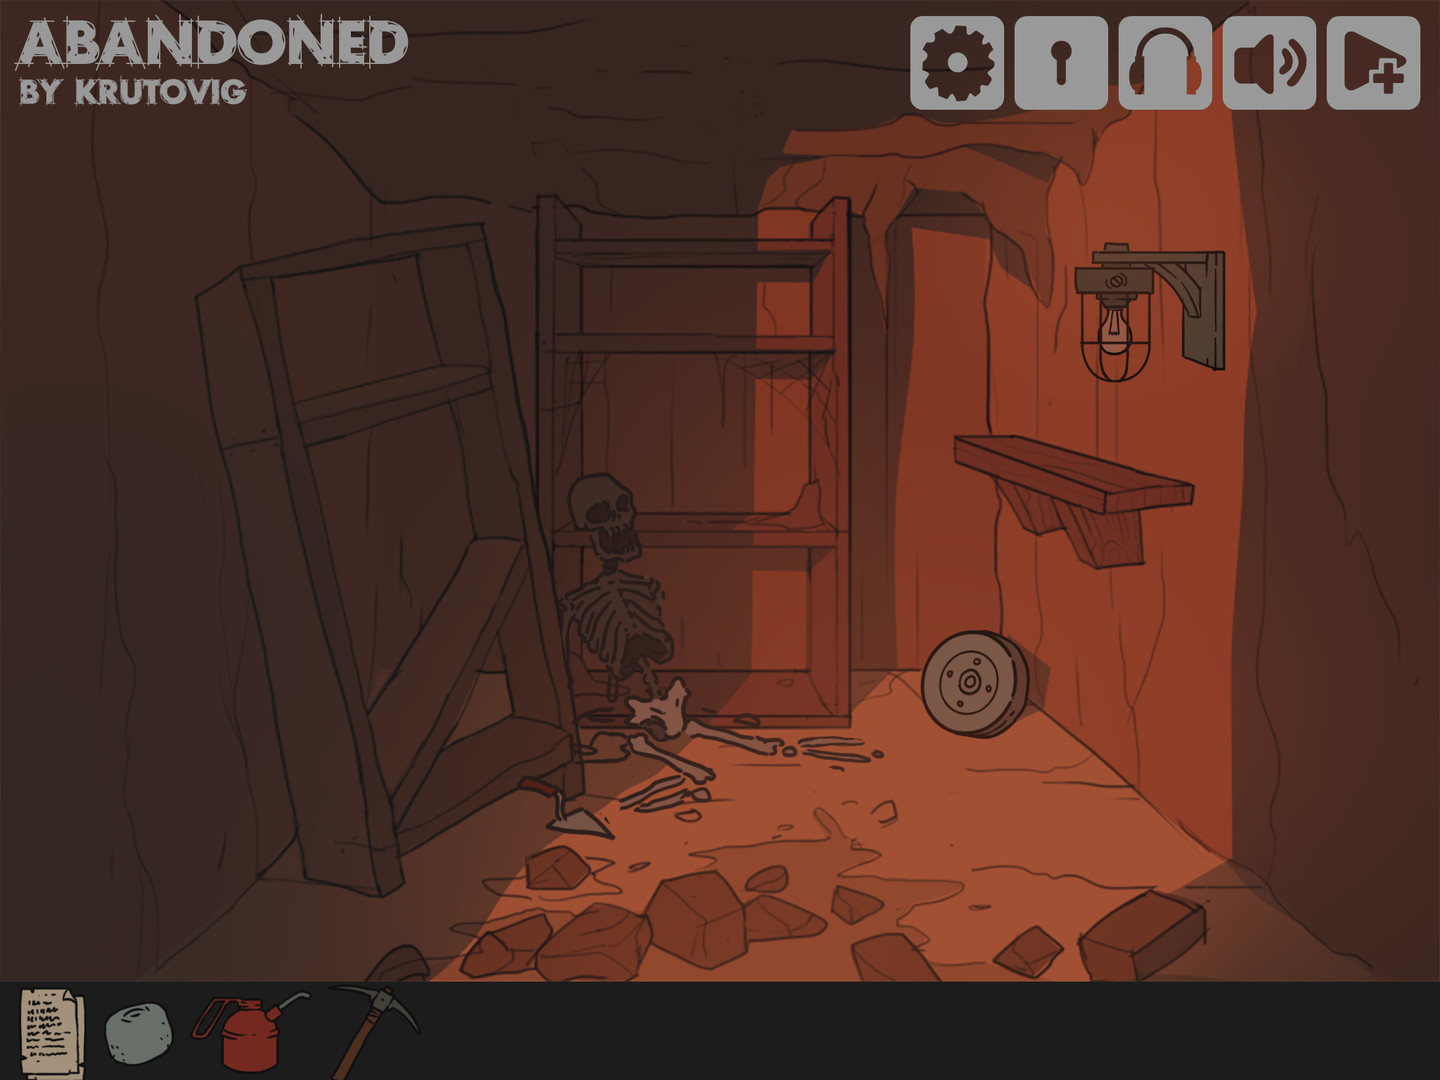 Download Abandoned Full Pc Game